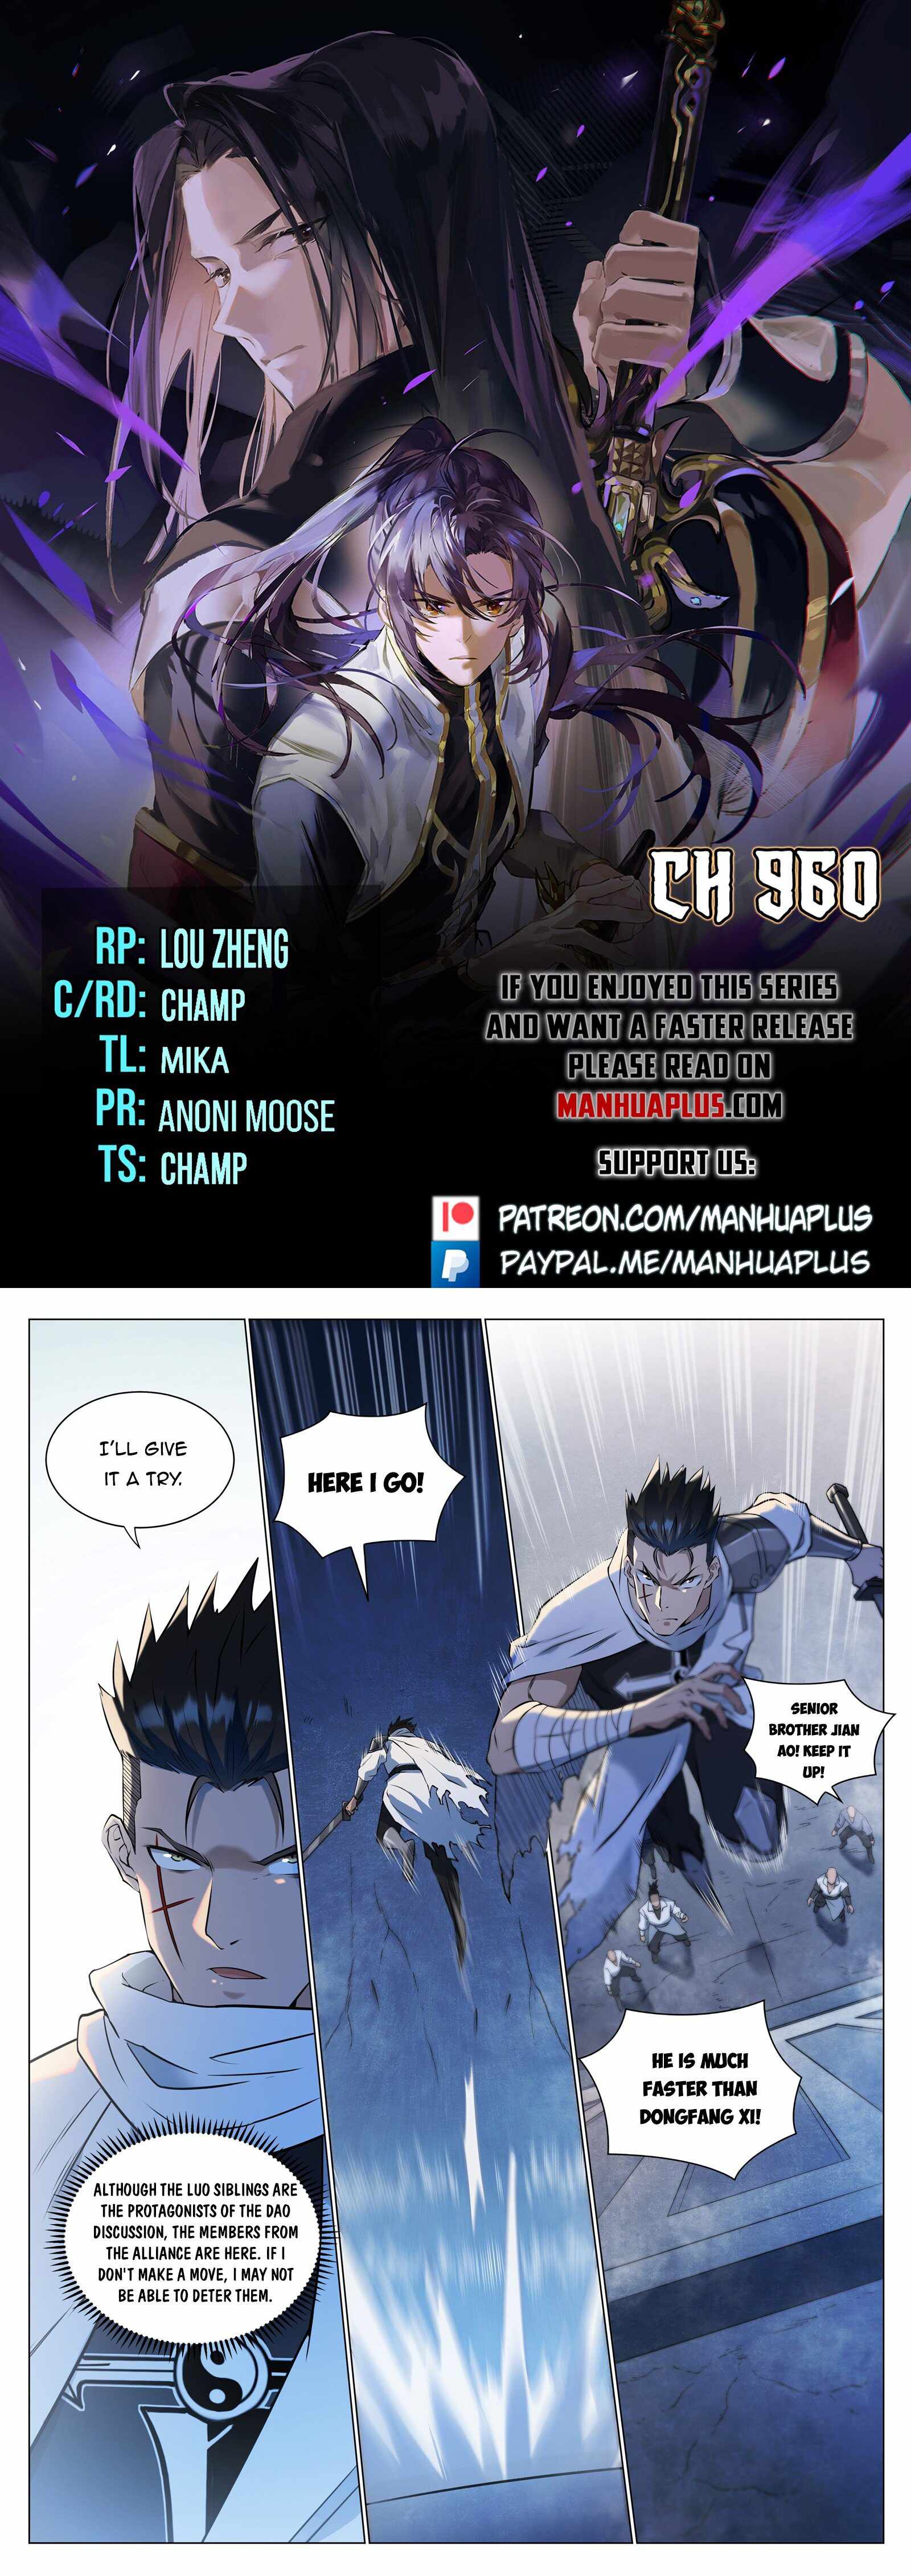 Chapter - Tower of God Chapter 595 Spoilers & Discussion, Page 3